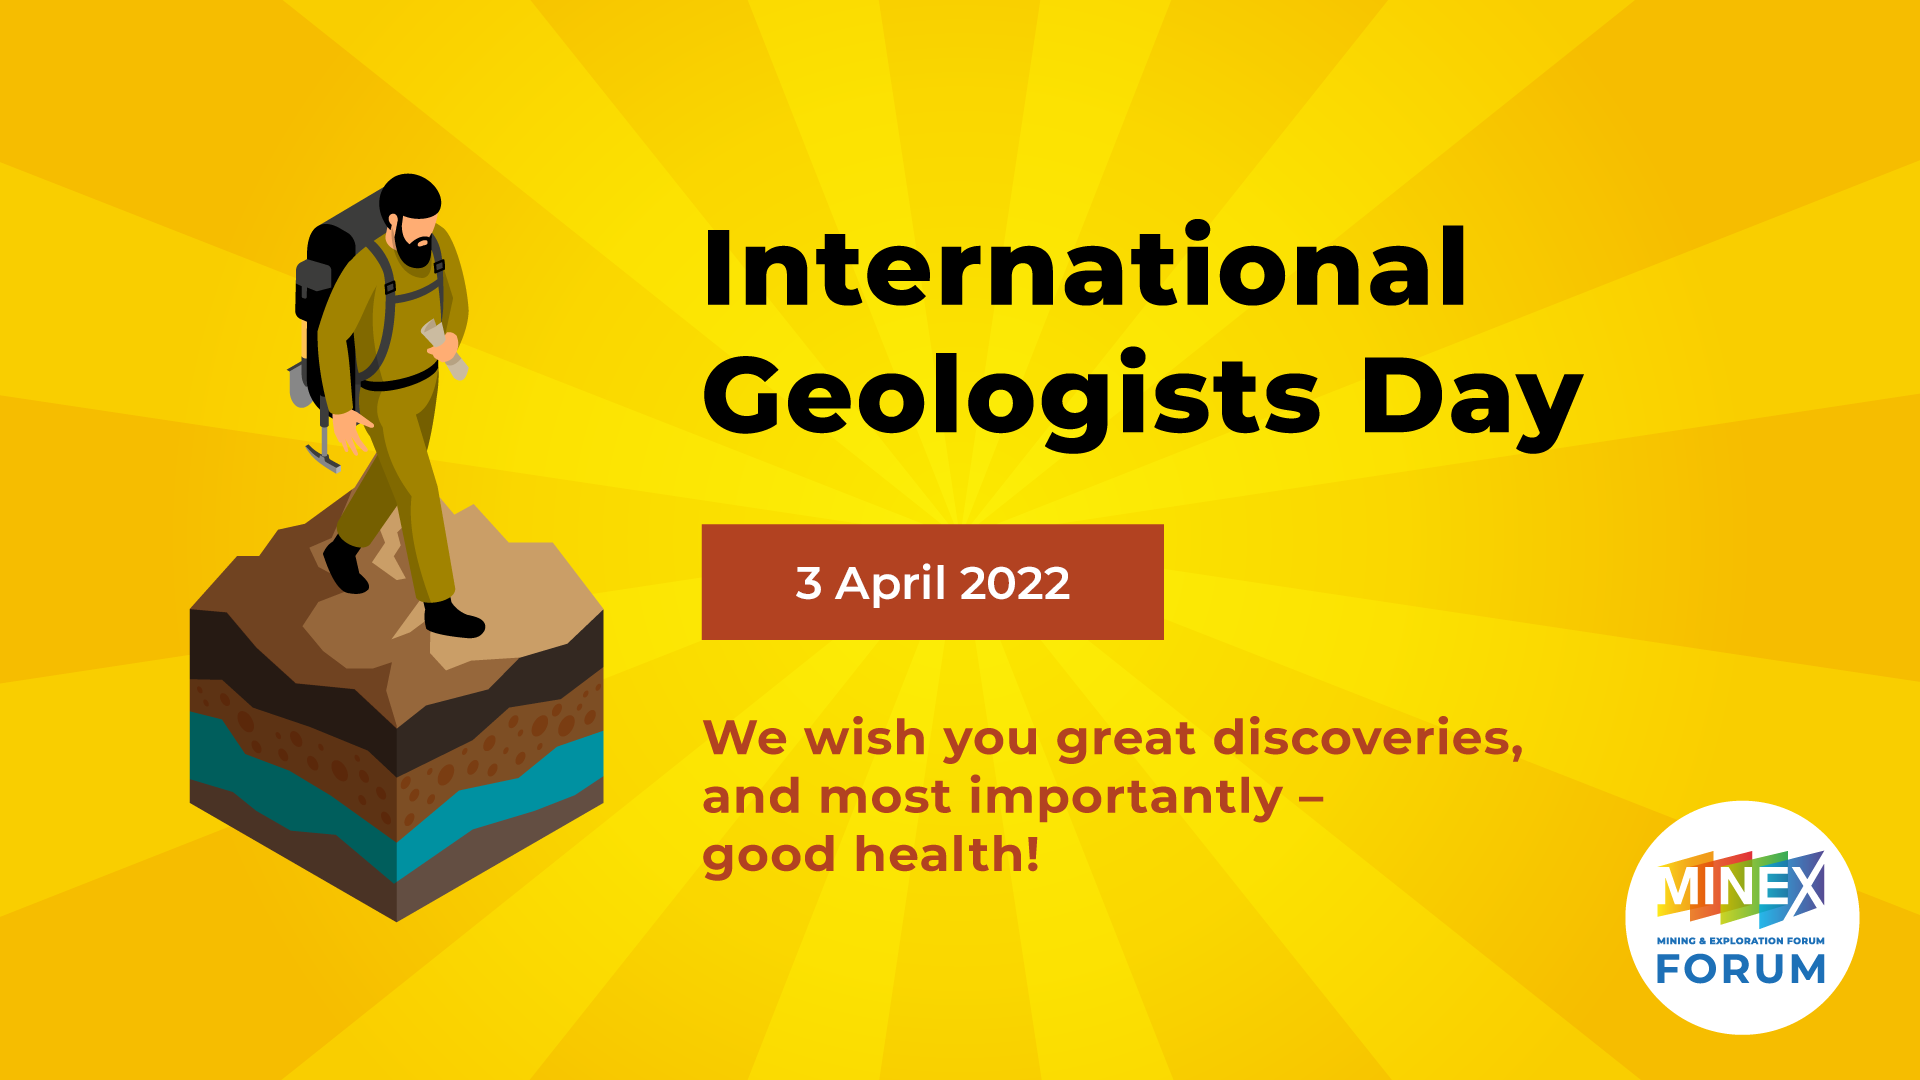 Happy Geologists Day!